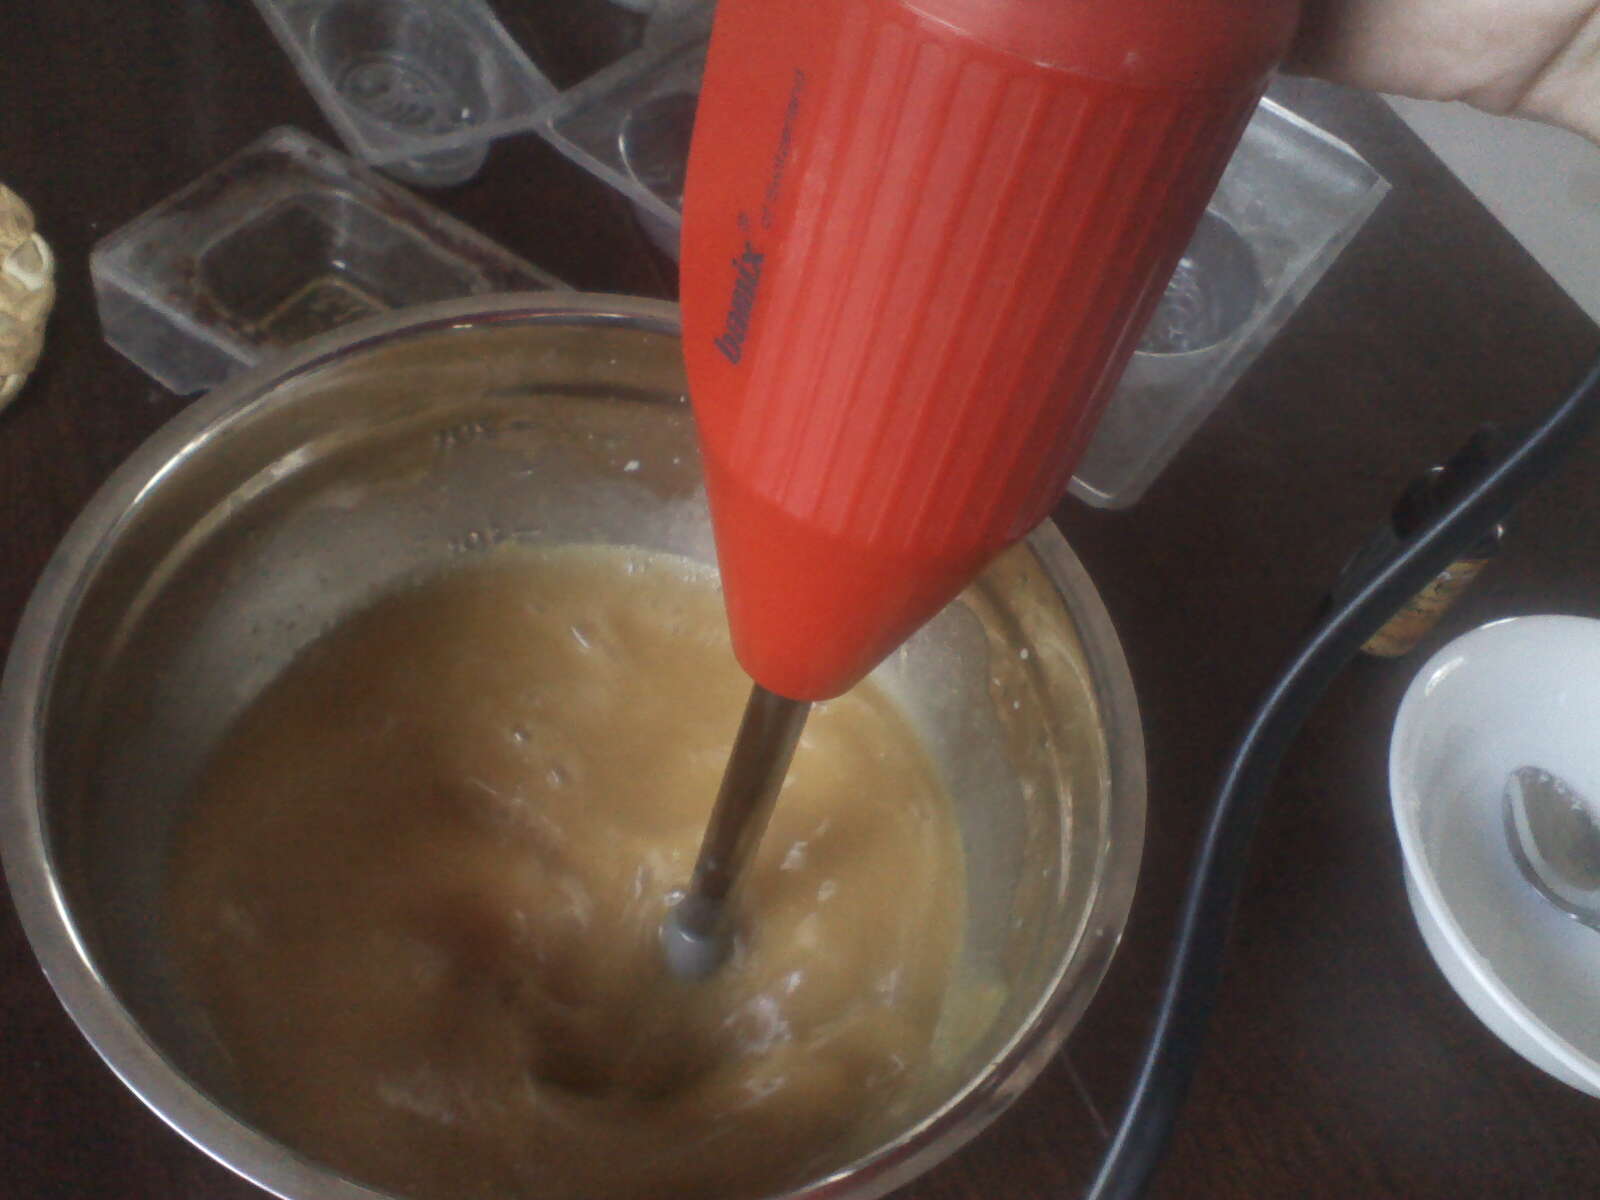 Image shows an immersion blender mixing soap ingredients in a pot